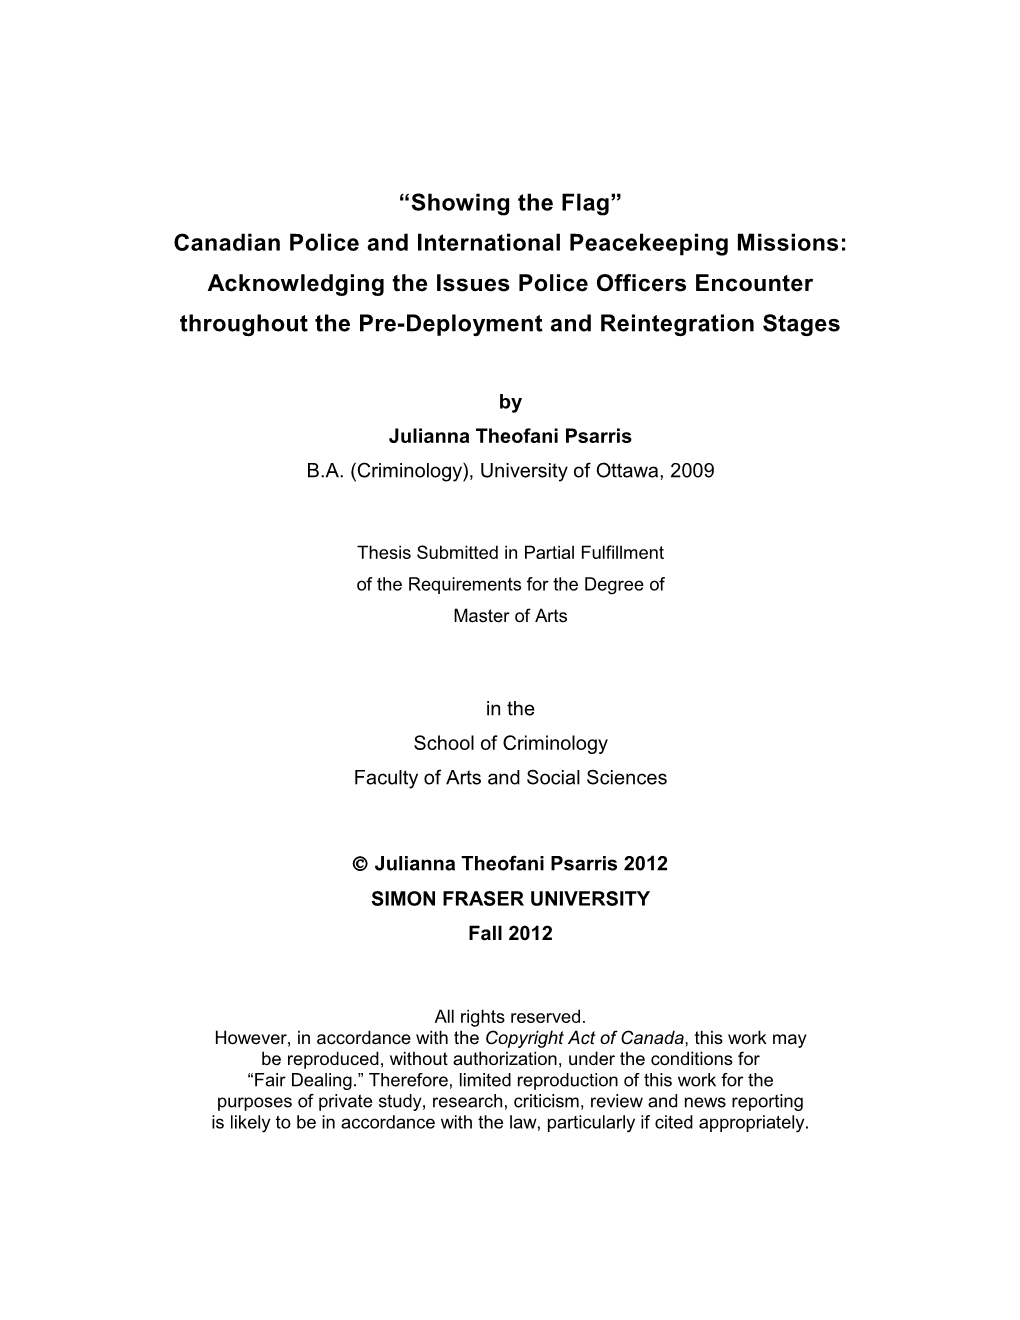 Canadian Police and International Peacekeeping Missions: Acknowledging the Issues Police Officers Encounter Throughout the Pre-Deployment and Reintegration Stages